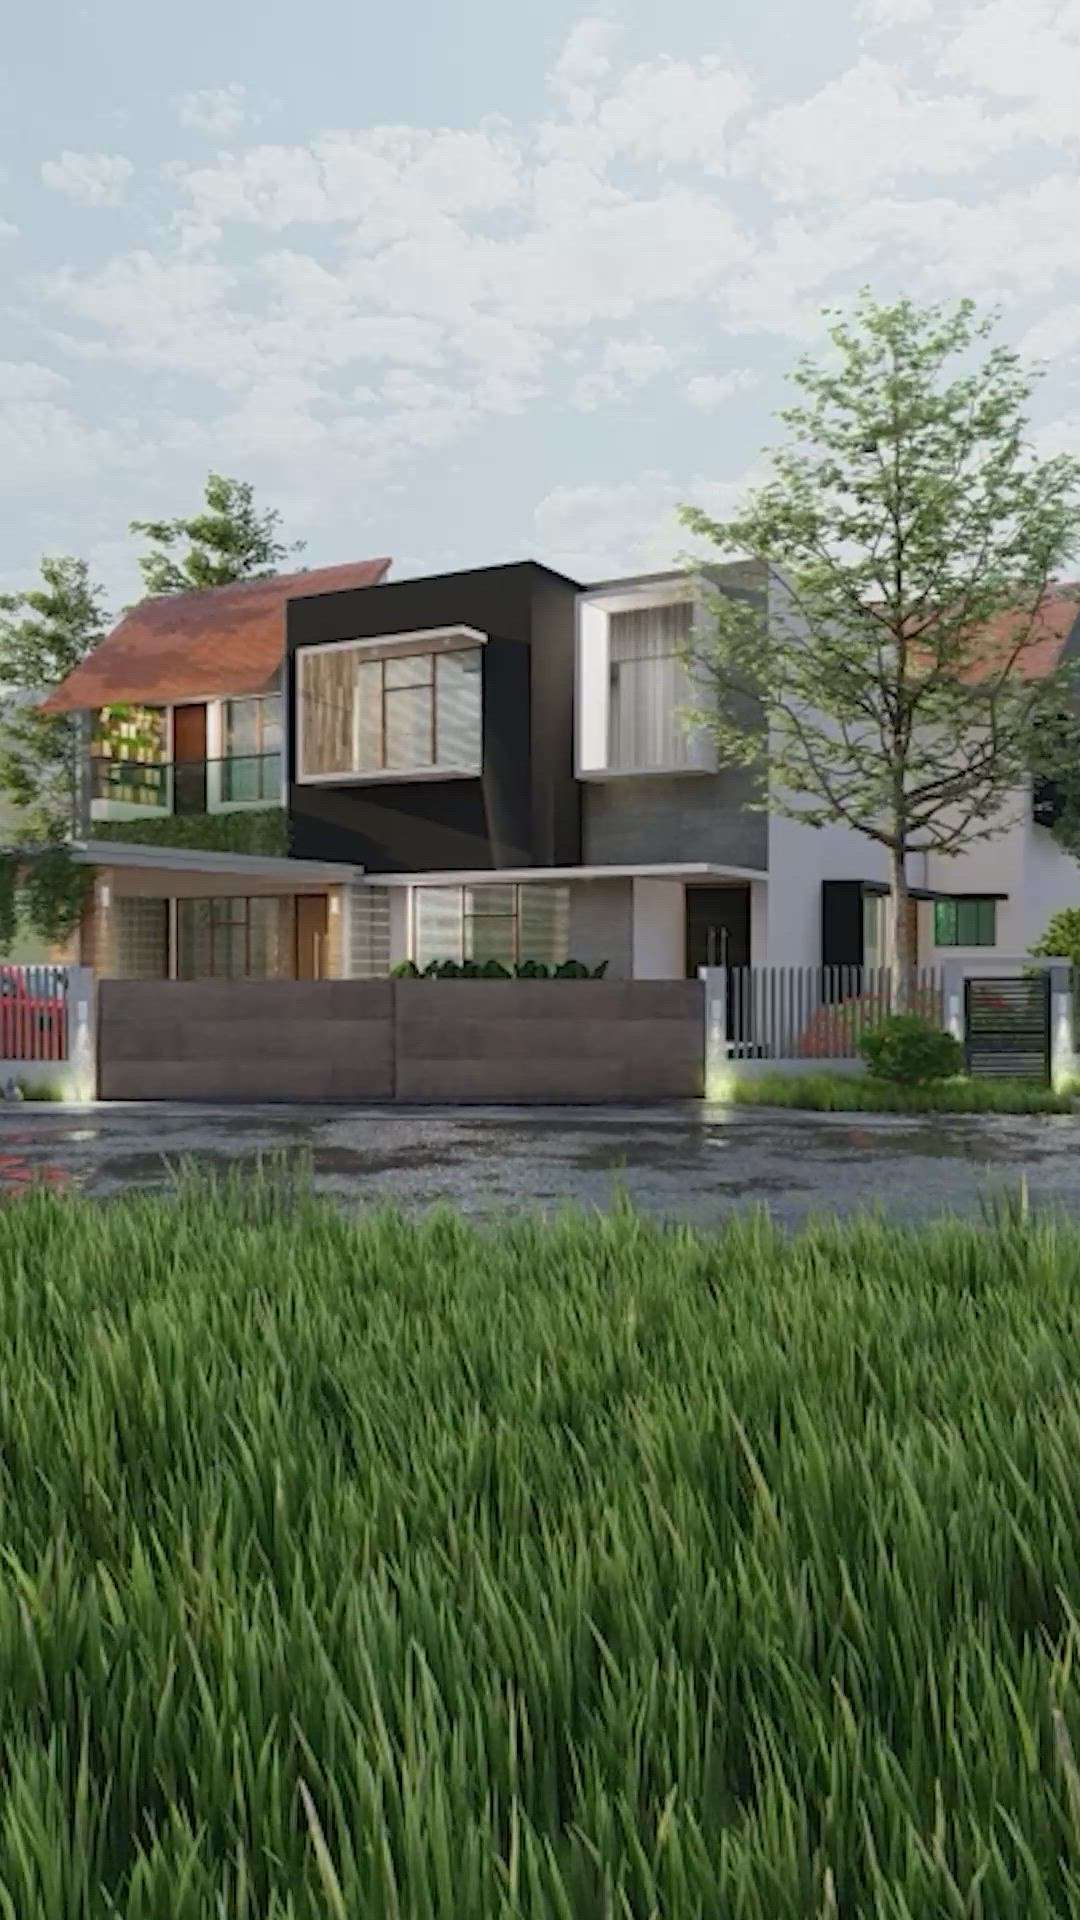 paddy field view residence..
commissioned residence work
msg on 9605846845
.
.
 #HouseDesigns  #HomeAutomation  #50LakhHouse  #ContemporaryHouse  #SmallHouse  #GraniteFloors  #TraditionalHouse  #HouseConstruction  #tyagiconstructions  #ElevationHome  #ElevationDesign  #EastFacingPlan  #NorthFacingPlan  #LivingRoomPainting  #WoodenBalcony  #HomeAutomation